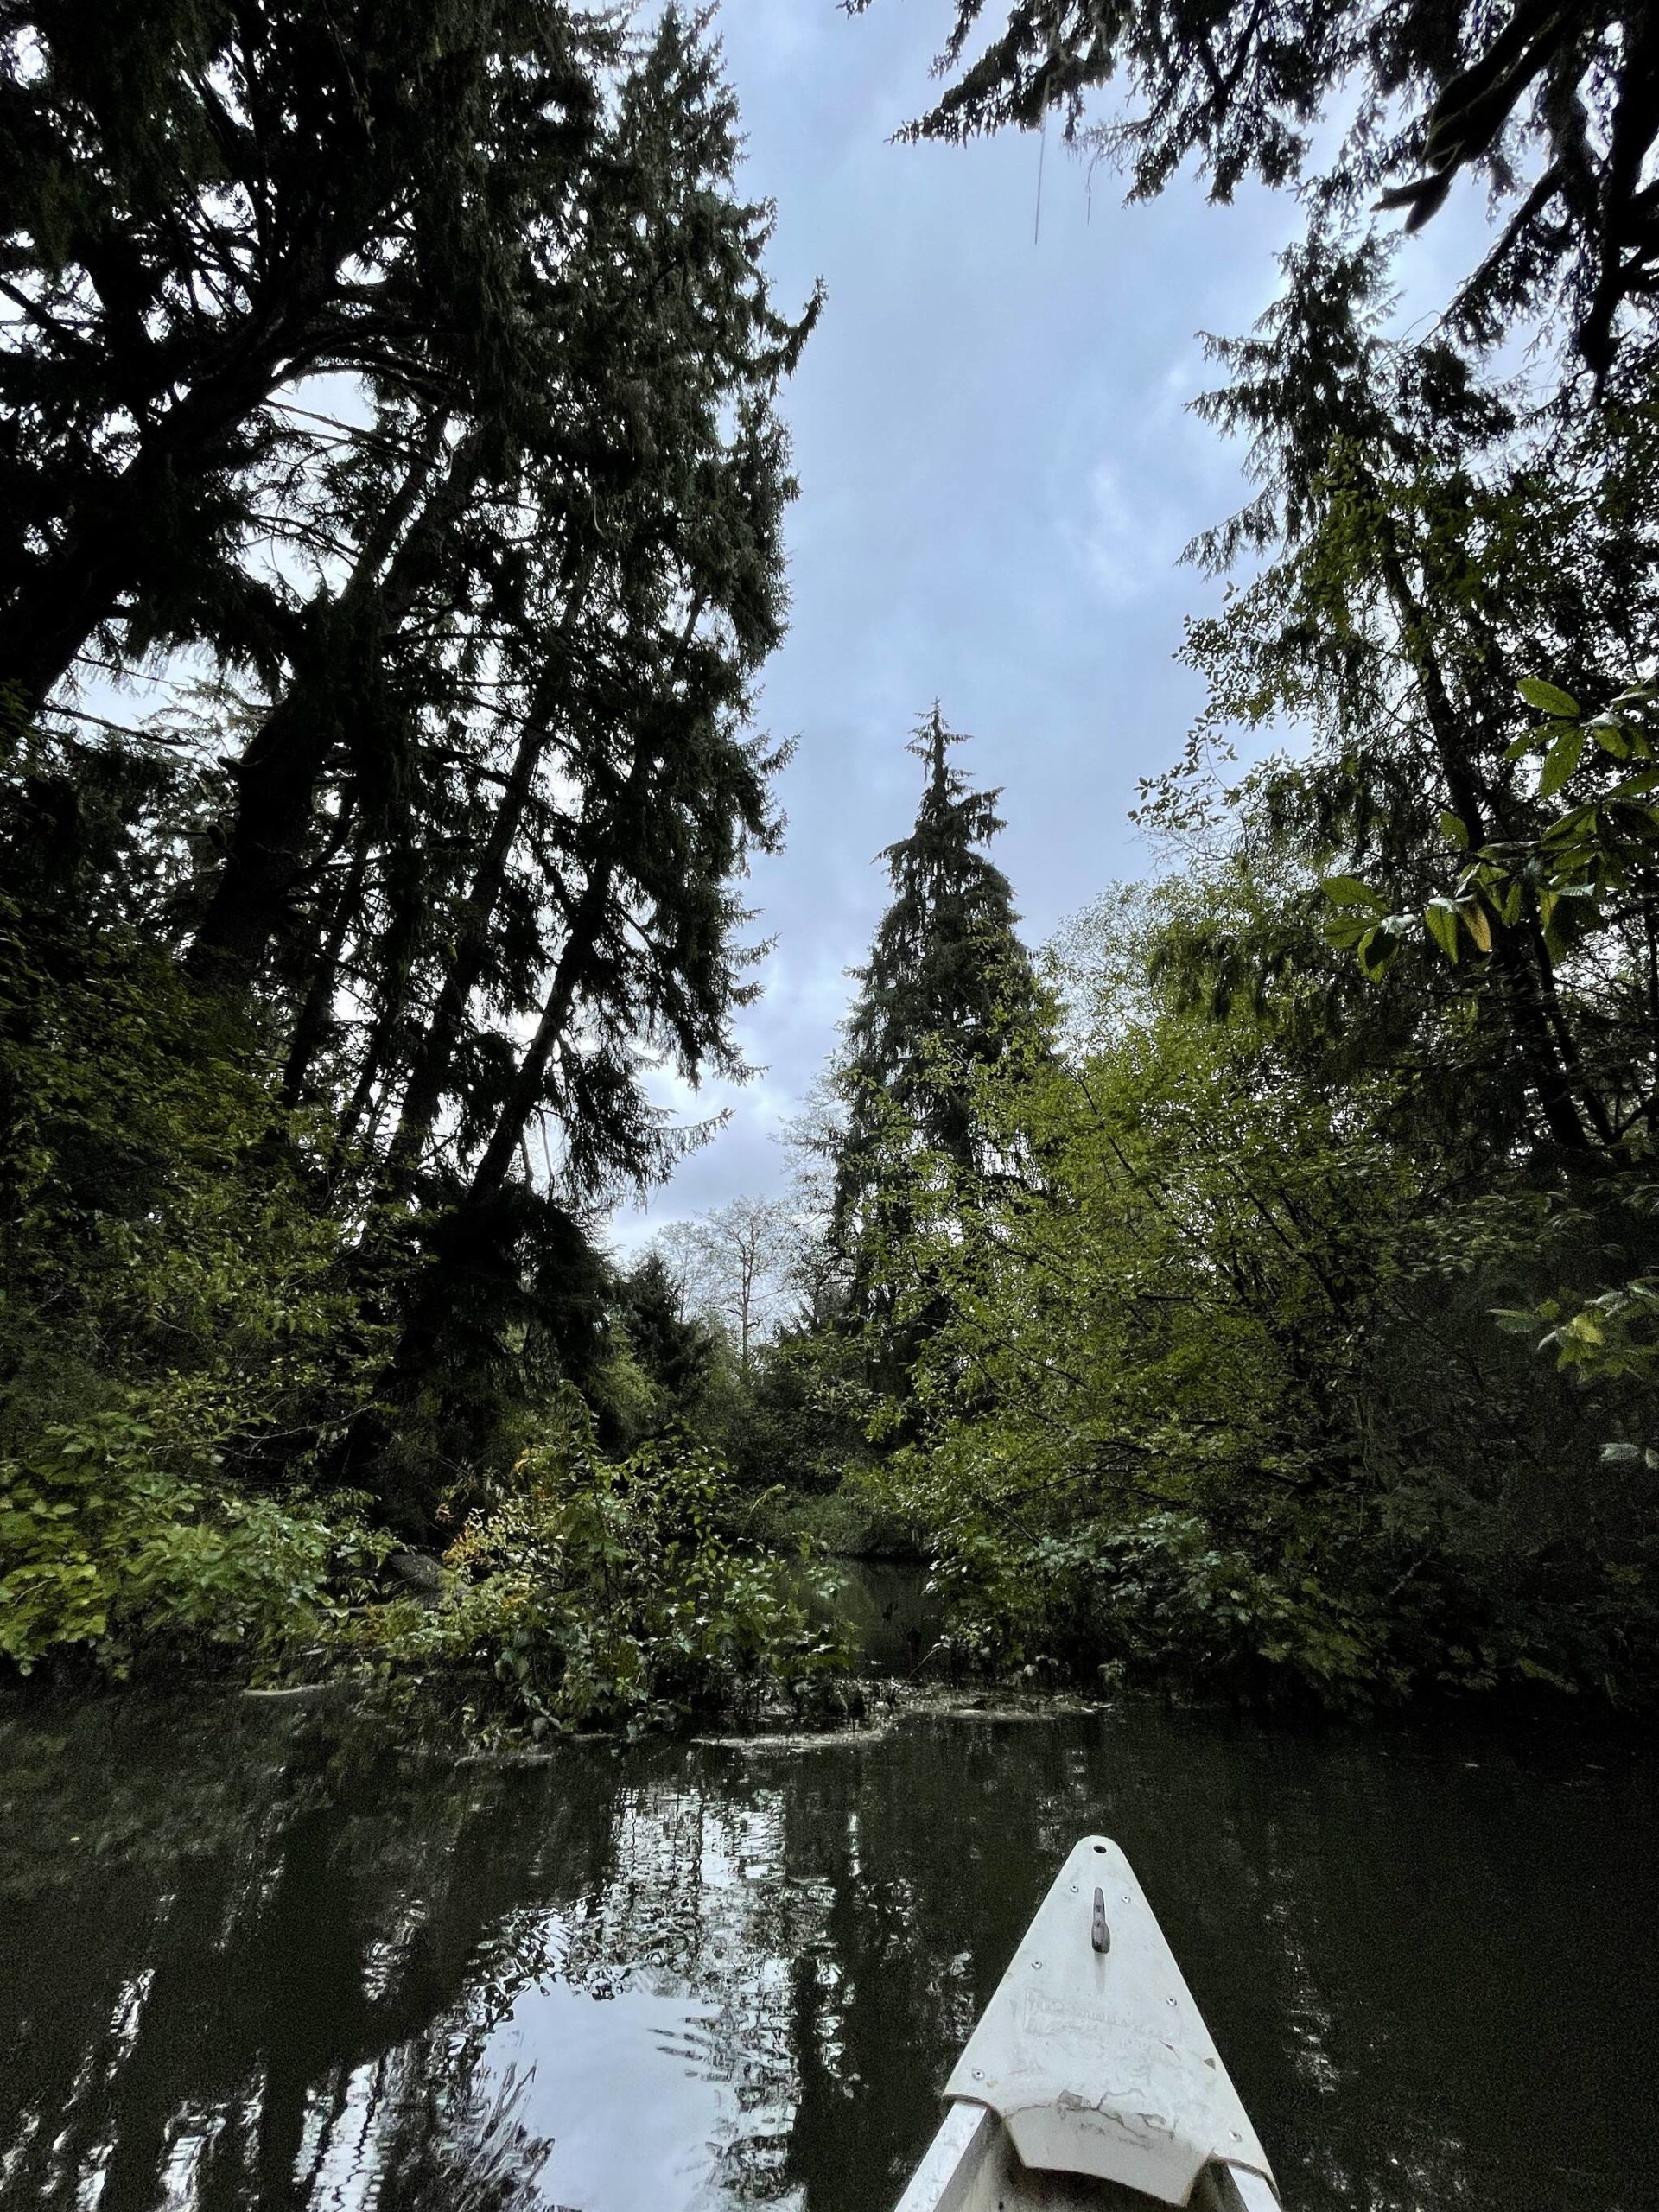 Michael S. Lockett / The Daily World 
The trees stretch tall above a waterway recently reconnected with the Hoquiam River to restore natural tidelands.